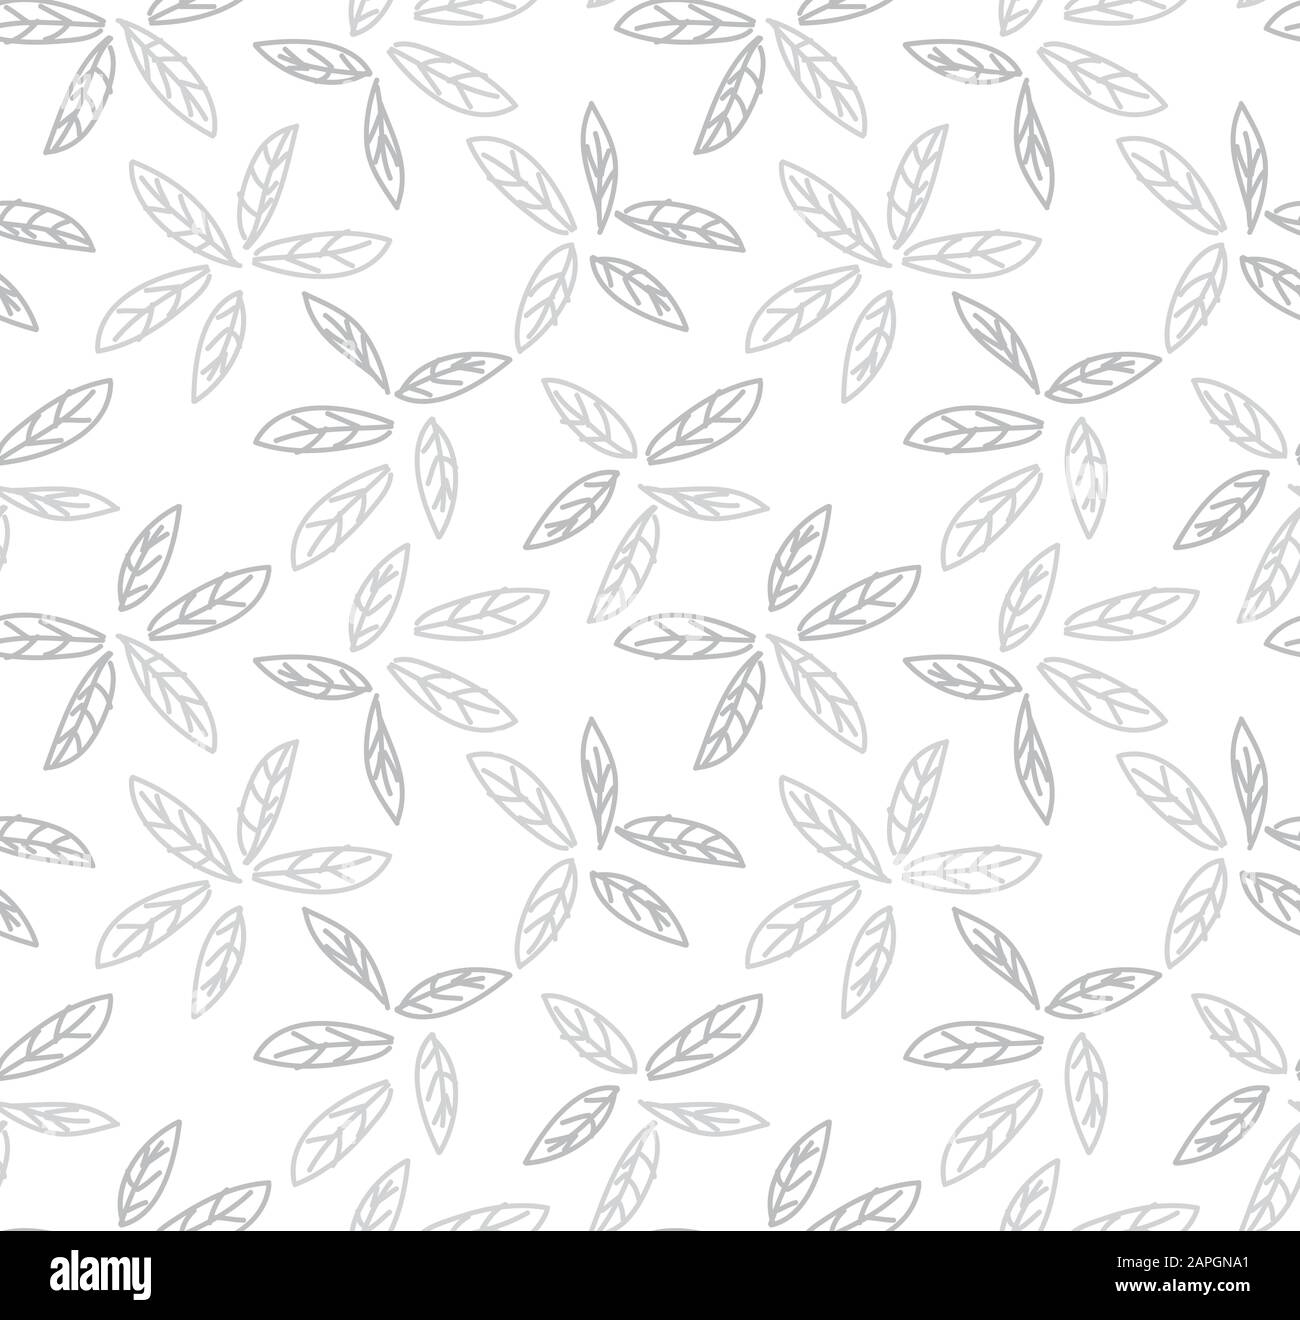 Abstract Botanical Leaf seamless Pattern  - It is a botanical leaf pattern suitable for fashion prints, backgrounds, websites, wallpaper, crafts Stock Vector